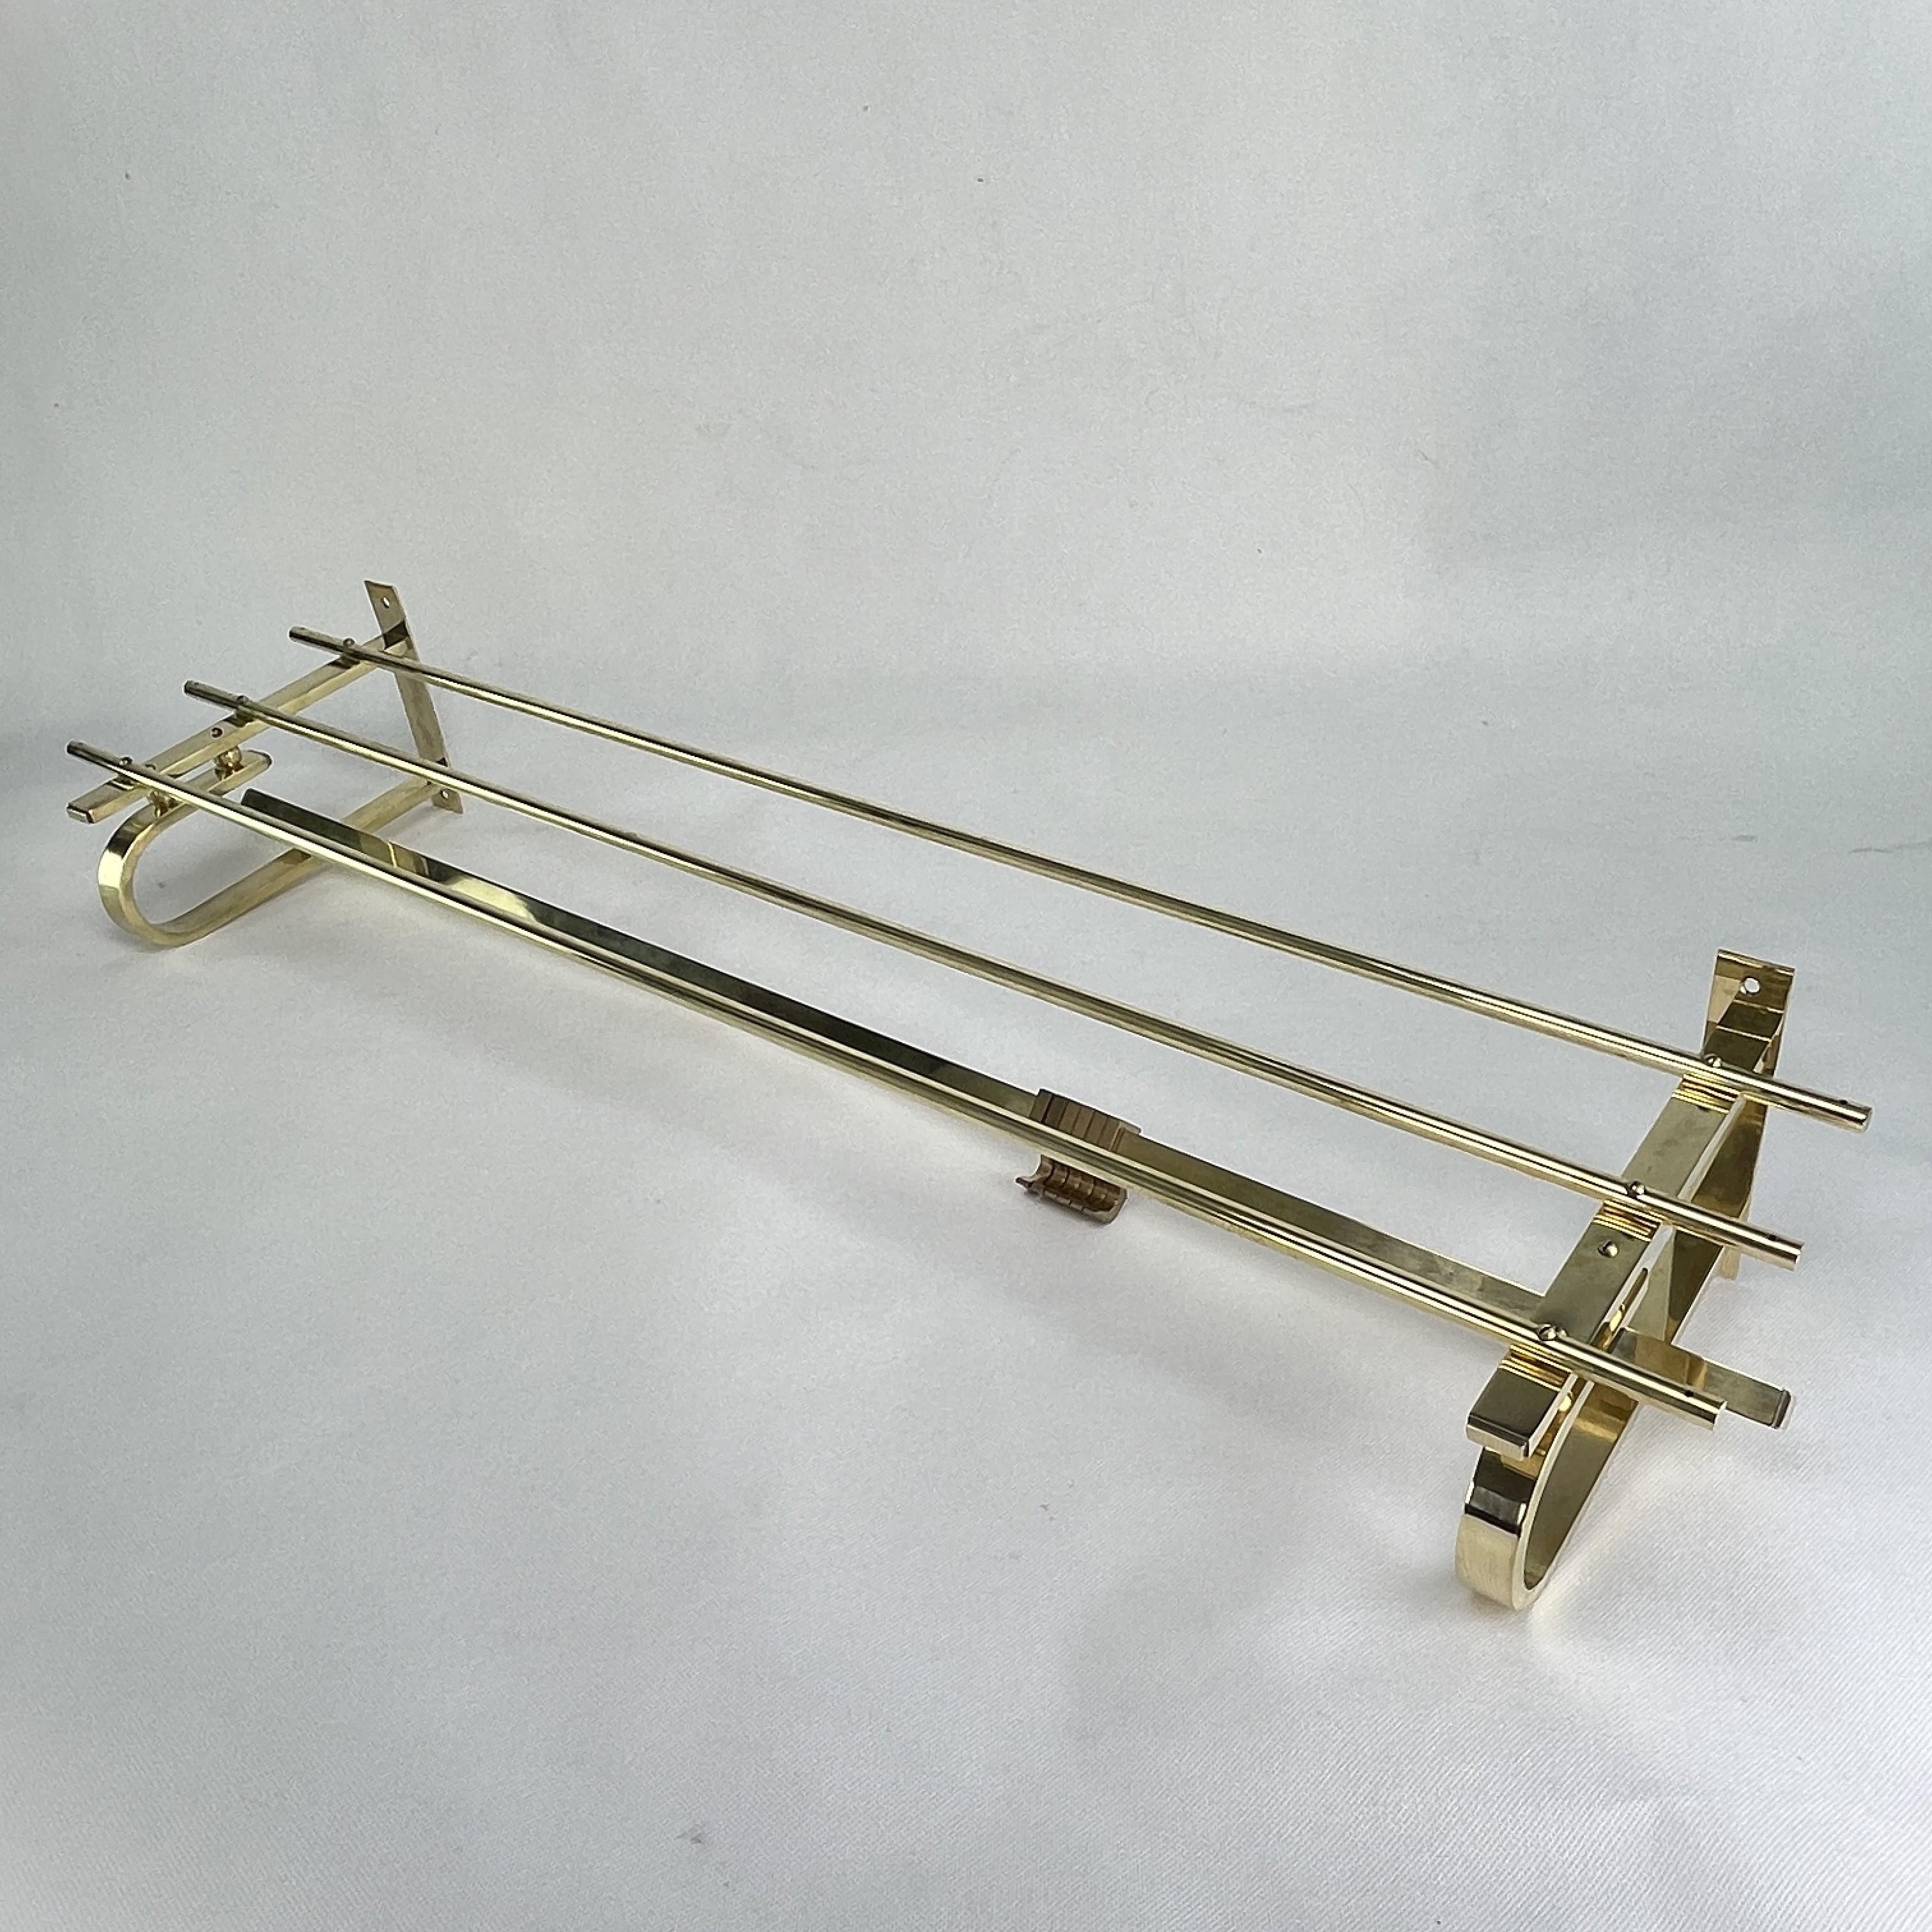 This beautiful vintage wall coat rack from the 1930s is in the streamline modern art deco style. This style emphasized curvy streamlined shapes.

This coat rack has 6 movable hooks to hold your clothes. 

Beautiful timeless antique piece that will